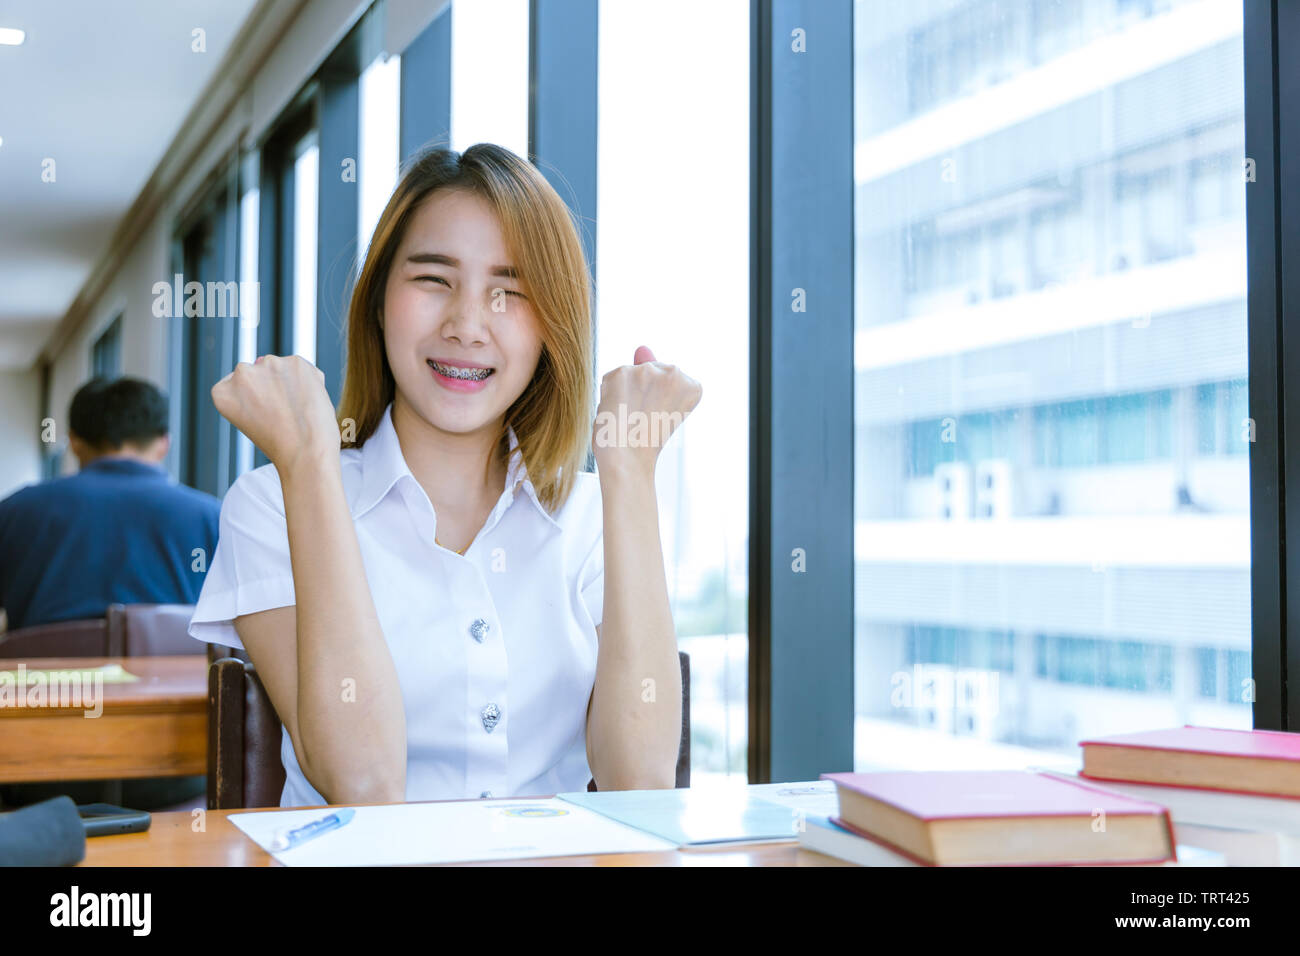 University Teen glad happy smile after good news pass exams Stock Photo